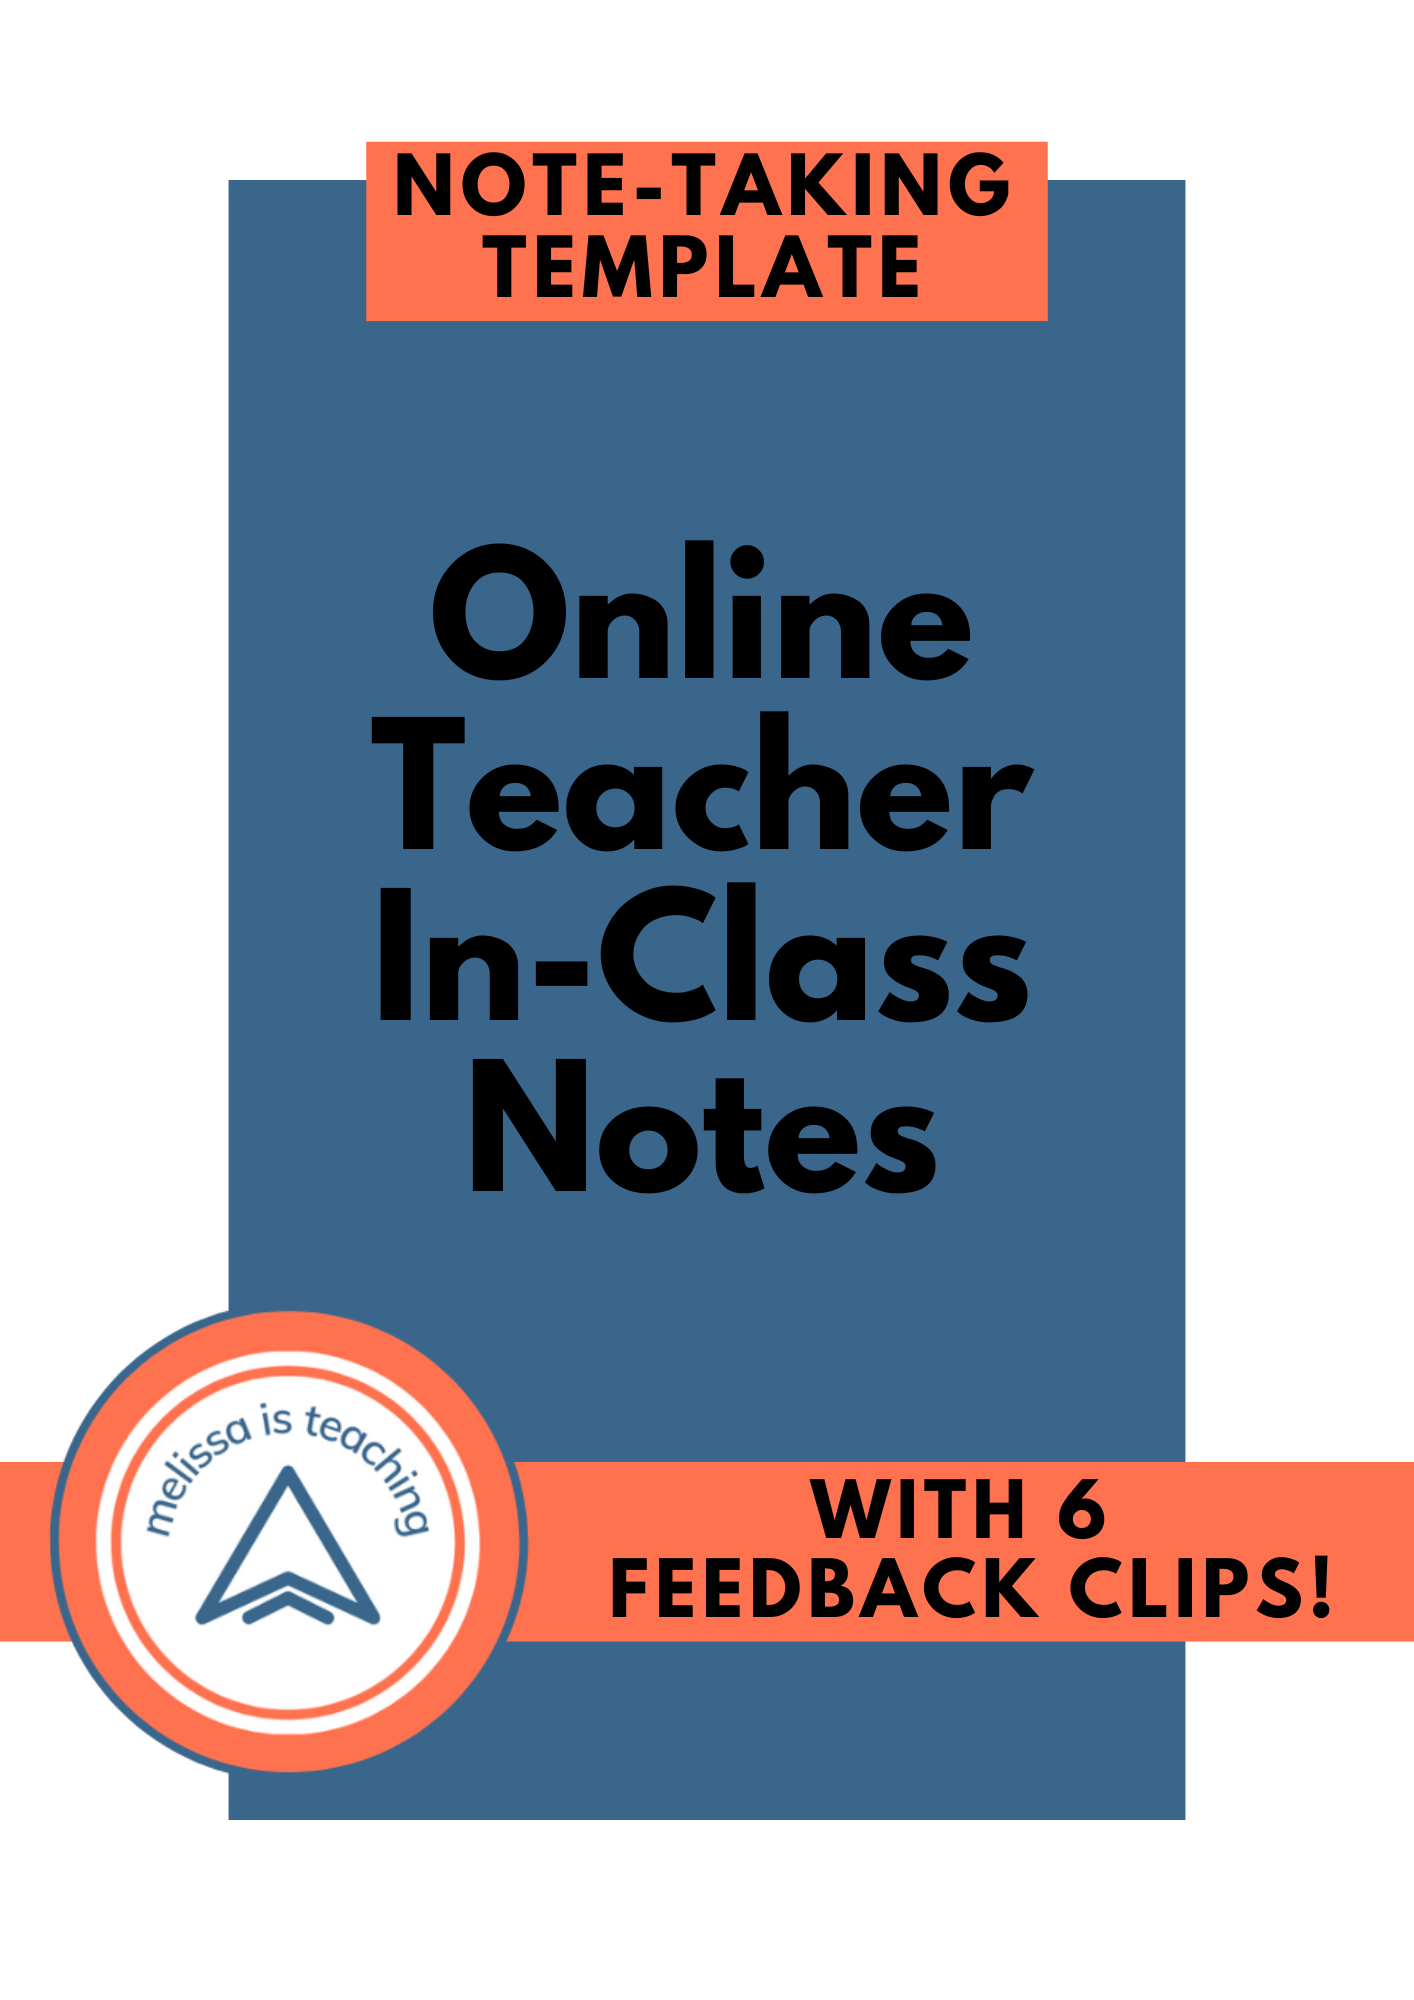 CLASS FEEDBACK SYSTEM: In-Class Notes Template & 6 Student Feedback Clips